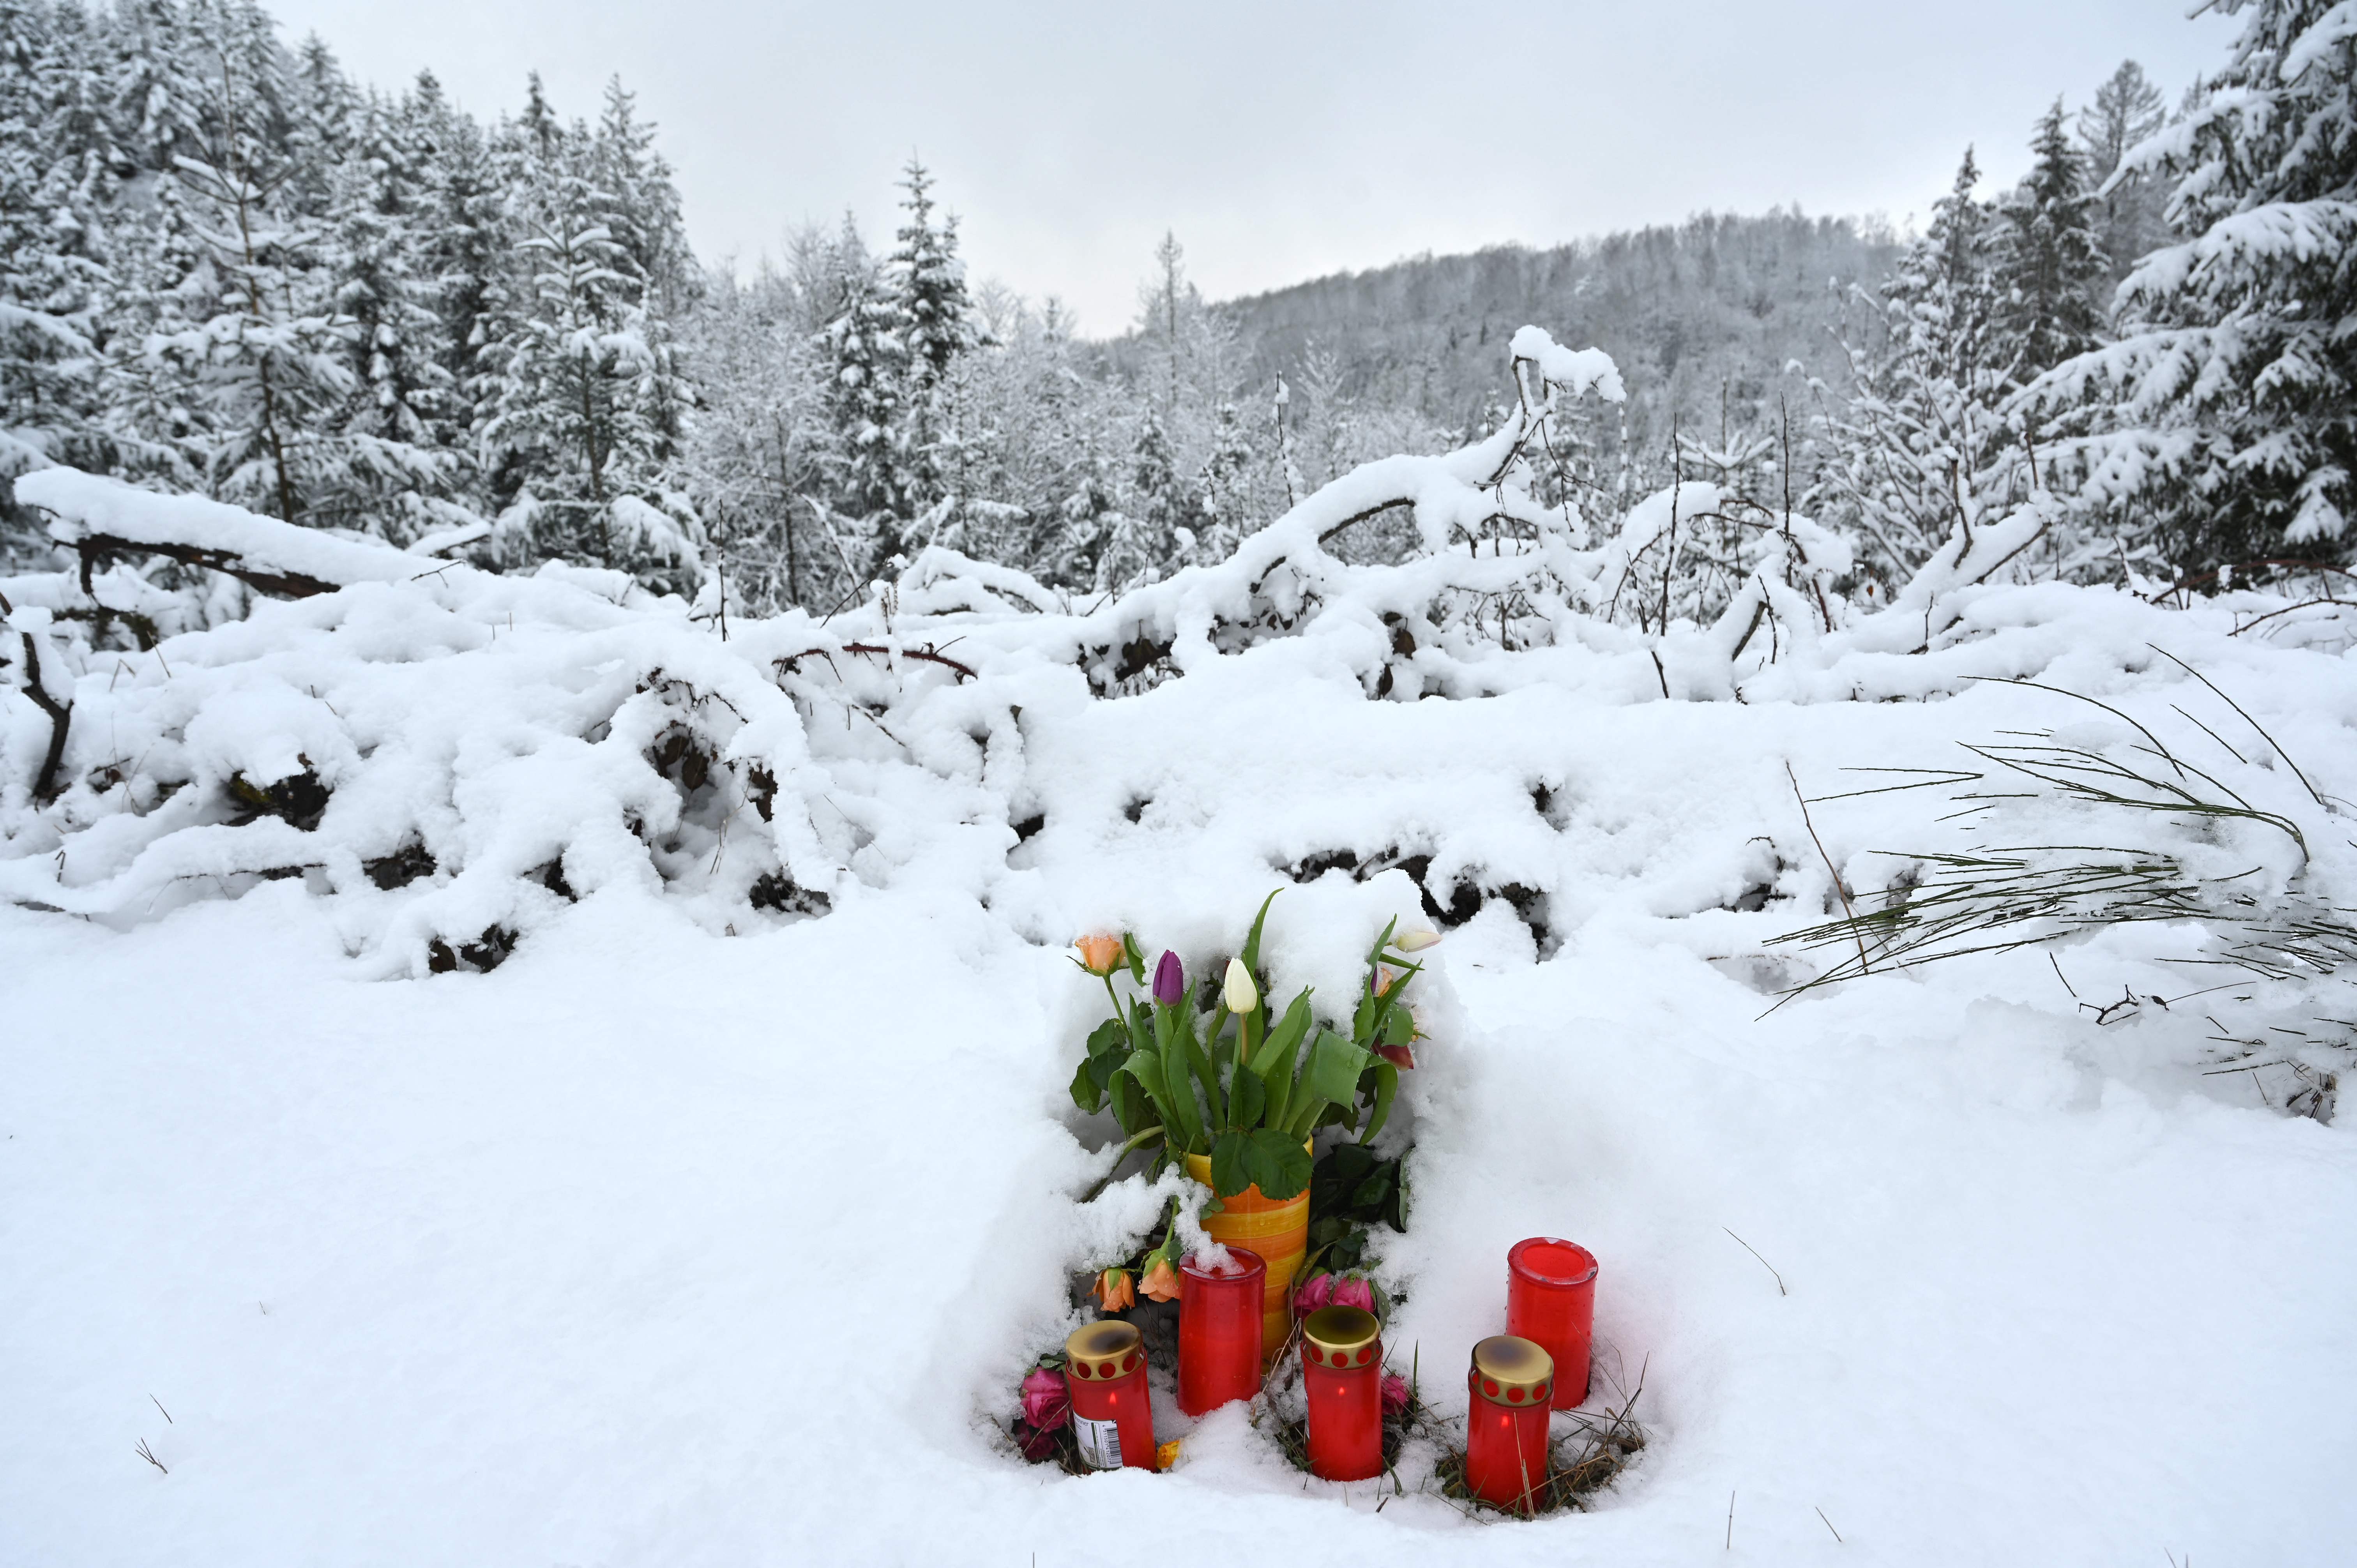 A makeshift memorial of flowers and candles is placed at the site where the body of Luise was found